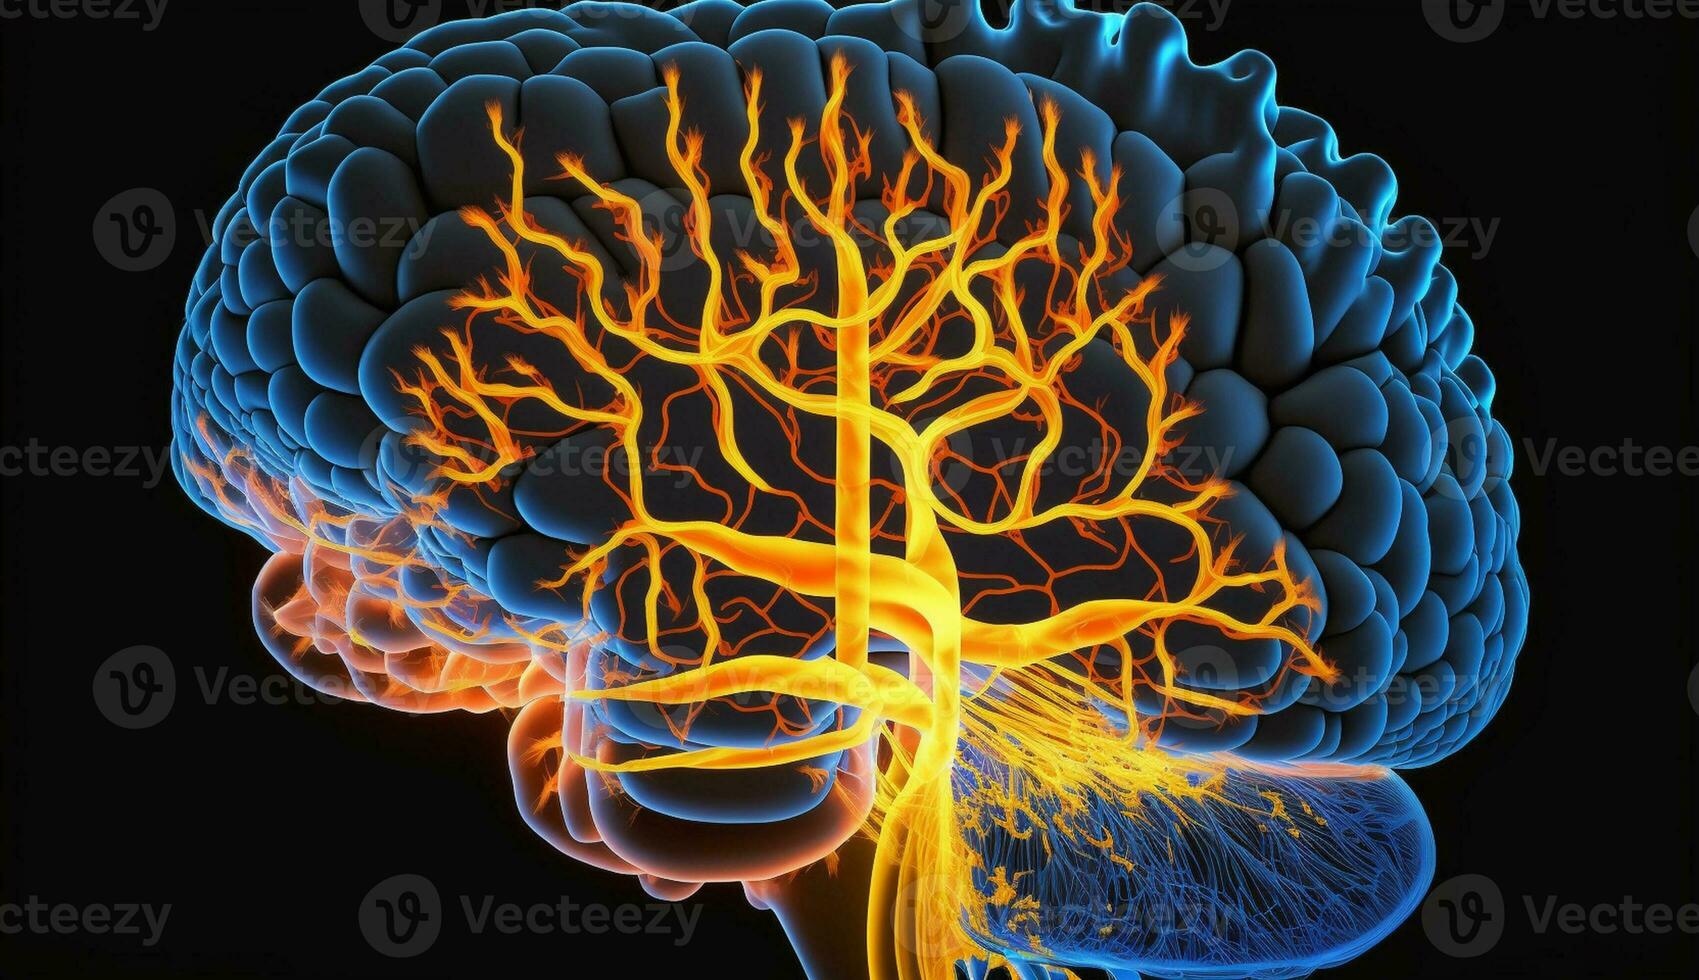 Human brain anatomy science nervous system synapse illustration generated by AI photo